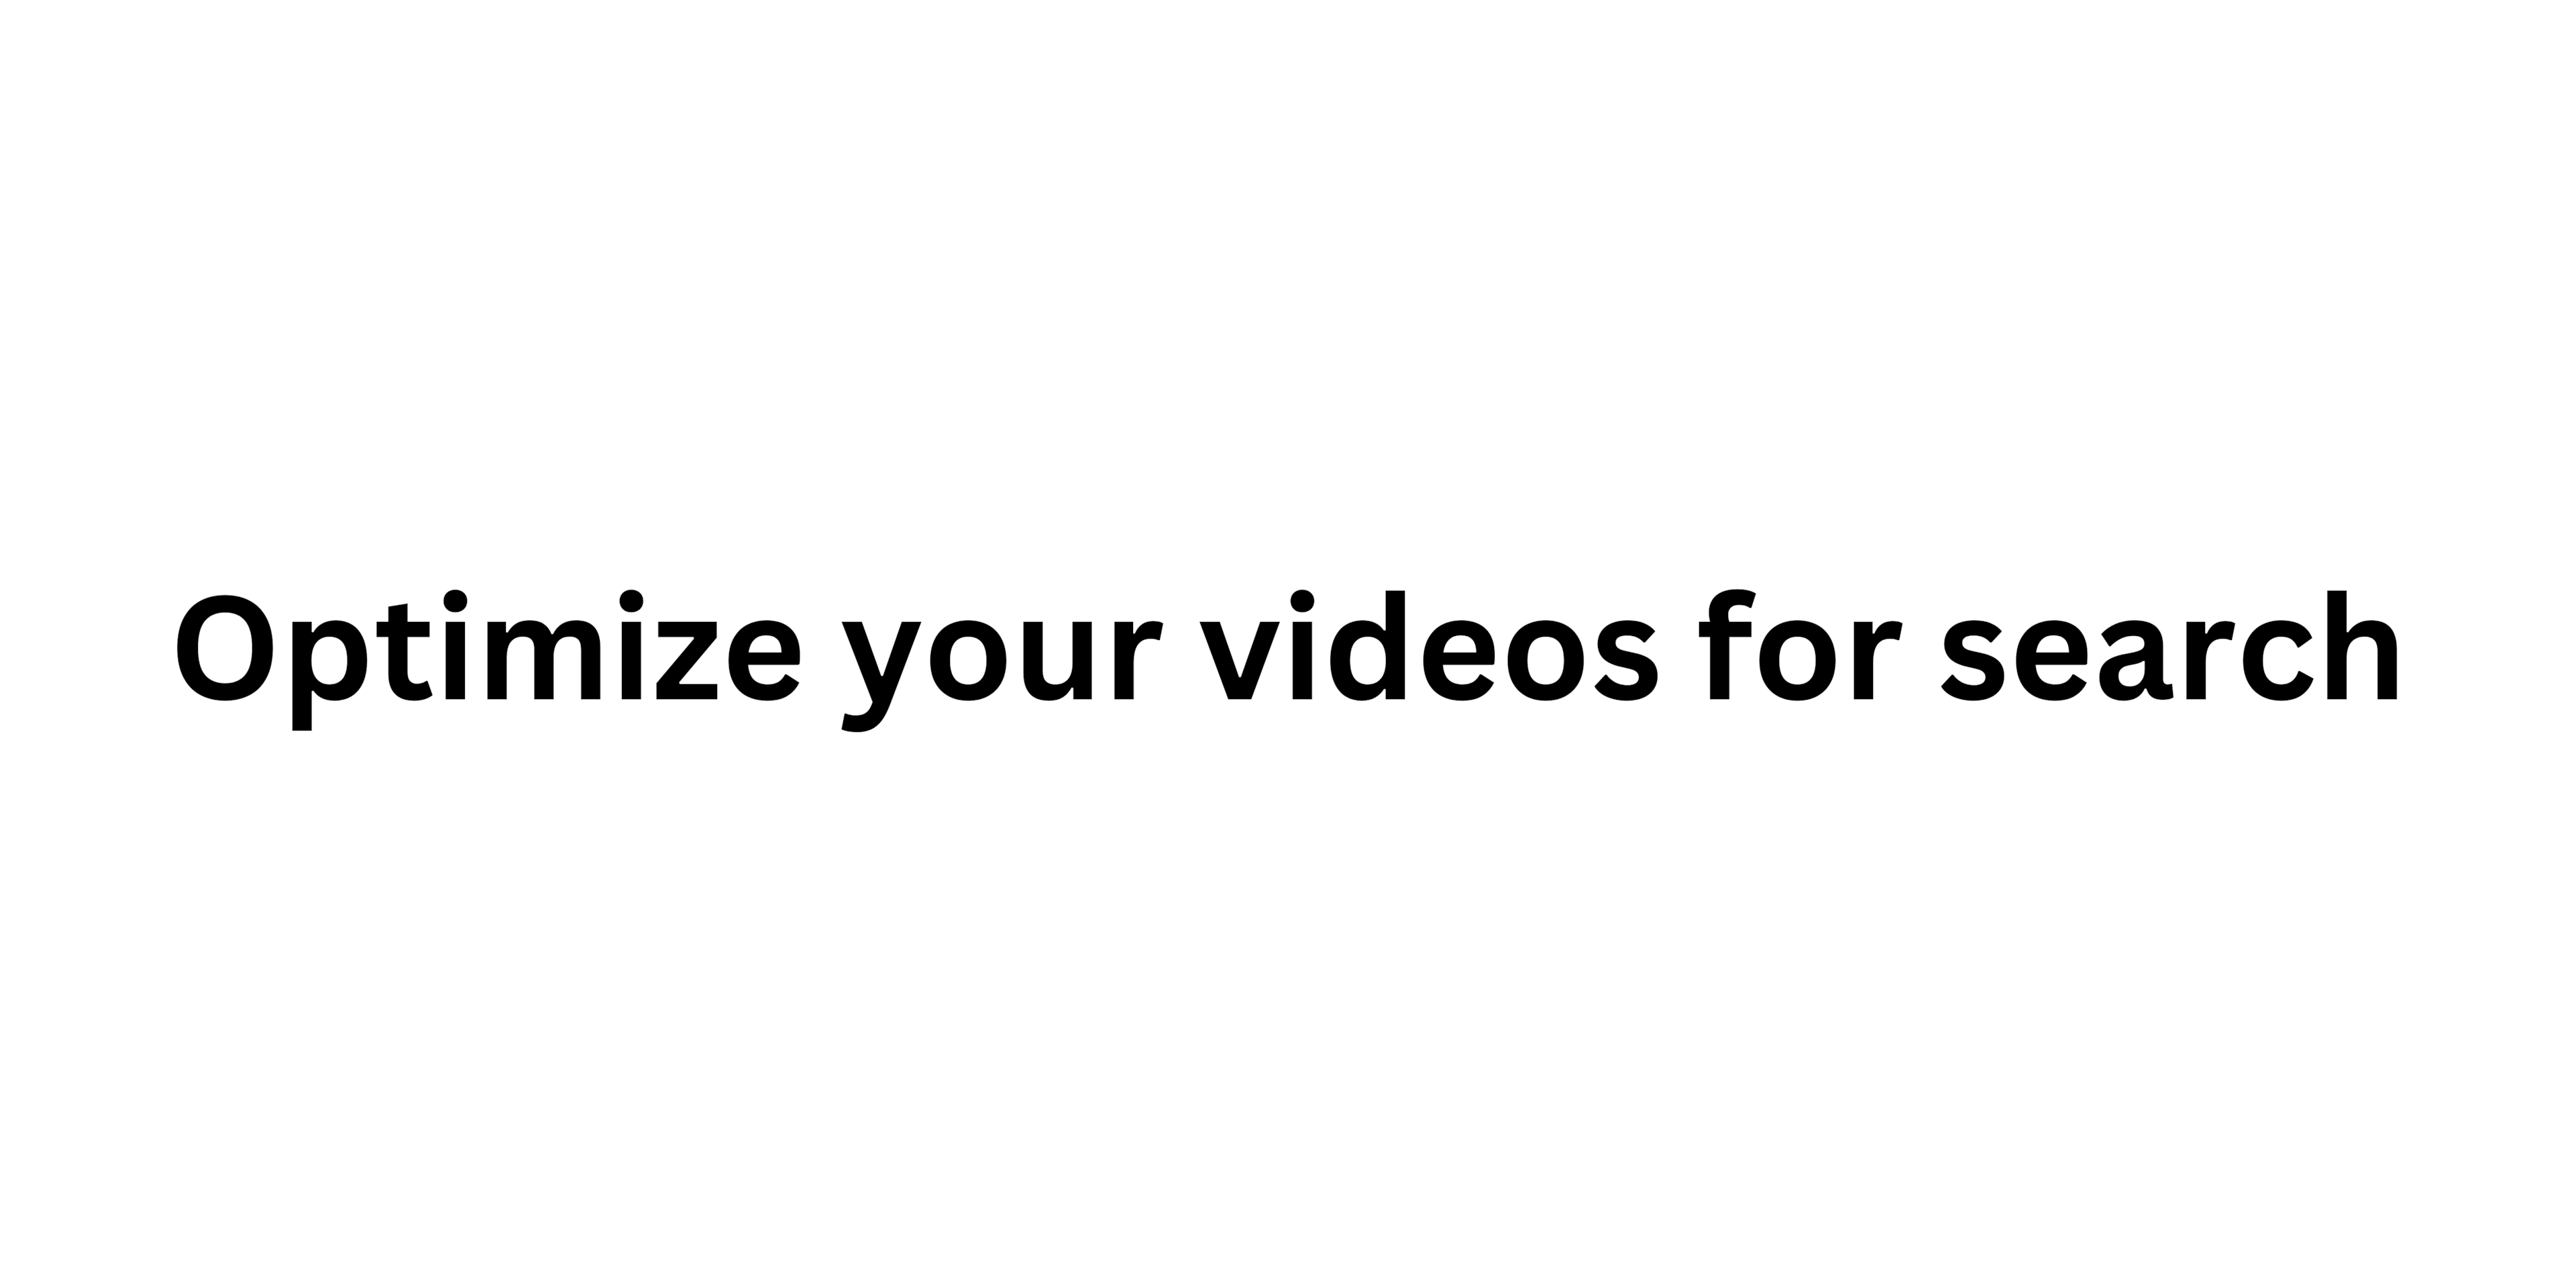 Optimize your videos for search